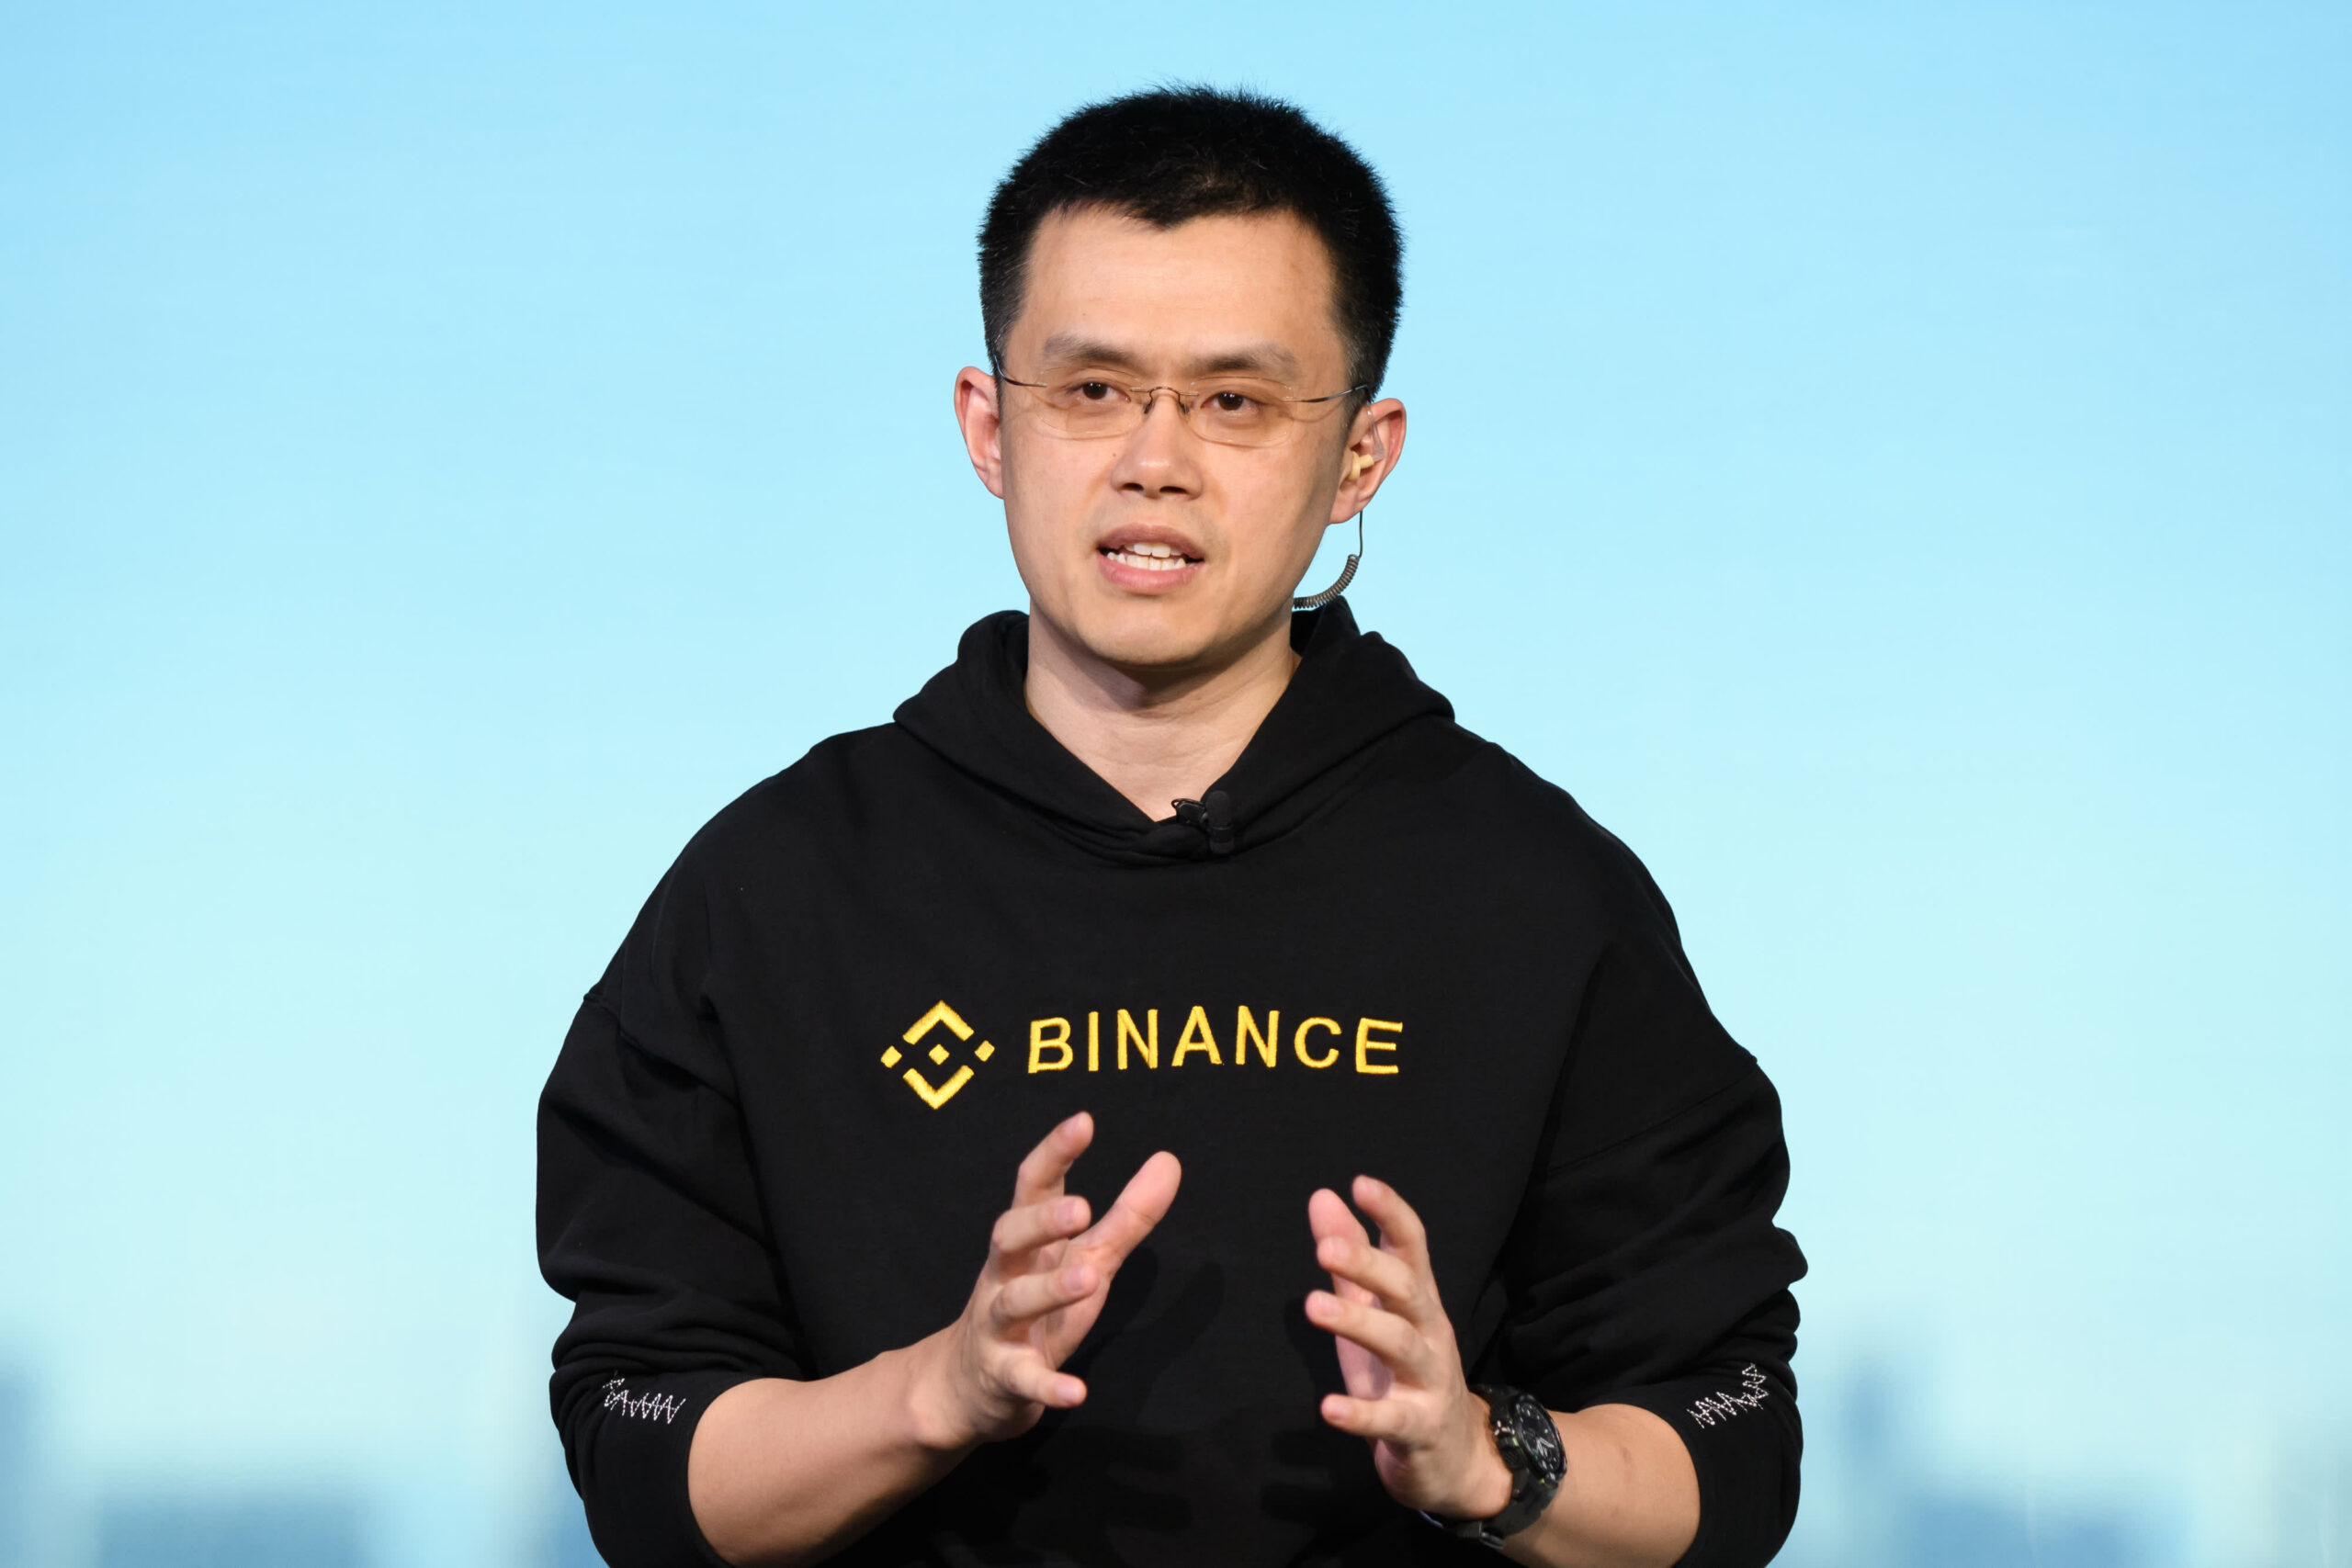 Binance CEO, Changpeng Zhao talking in a conference